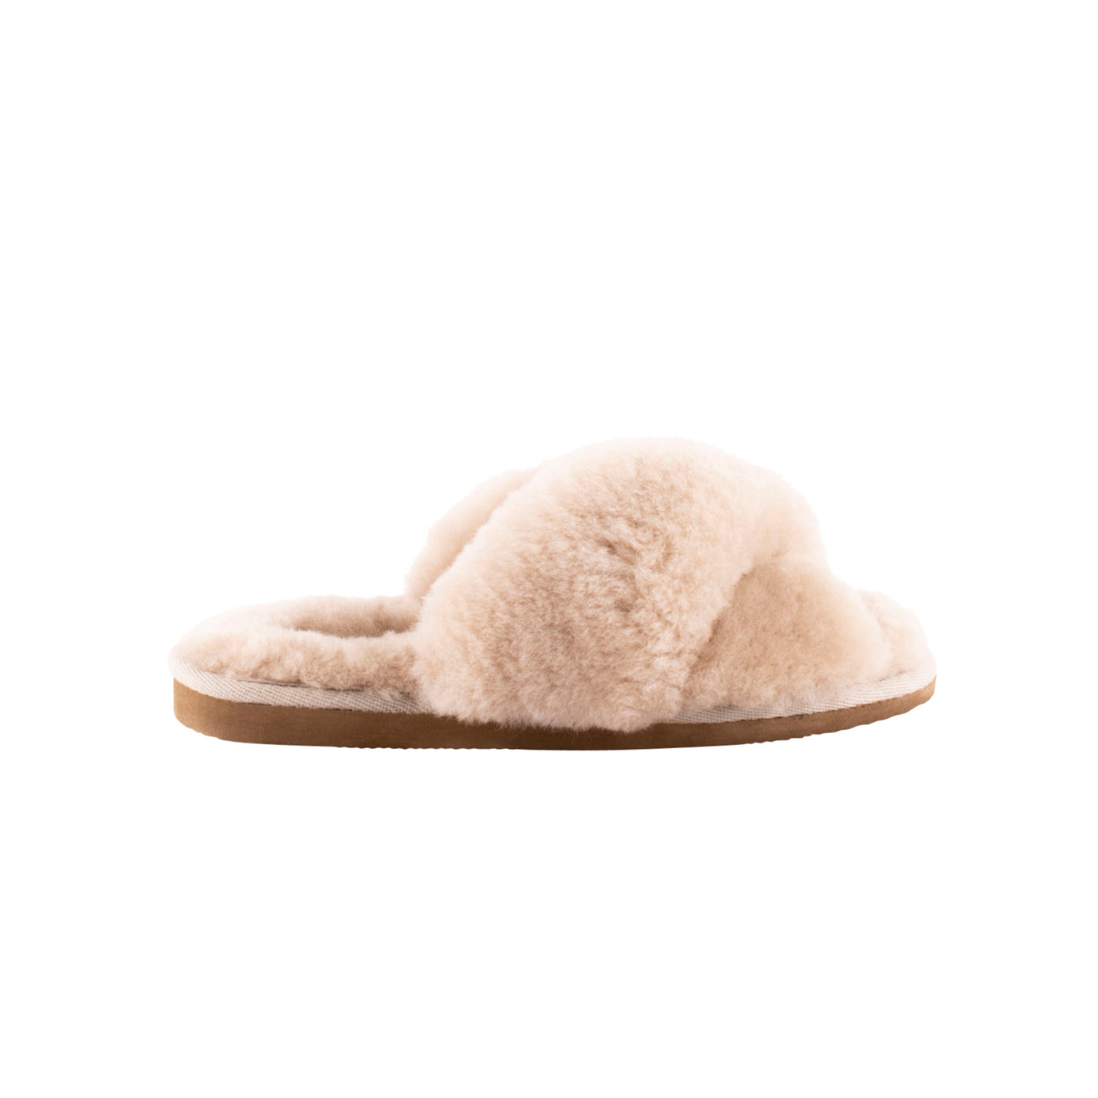 Shepherd of Sweden sheepskin slippers Lovisa in colour honey . Brand new and available to buy in our UK store. Seen here as a single slipper